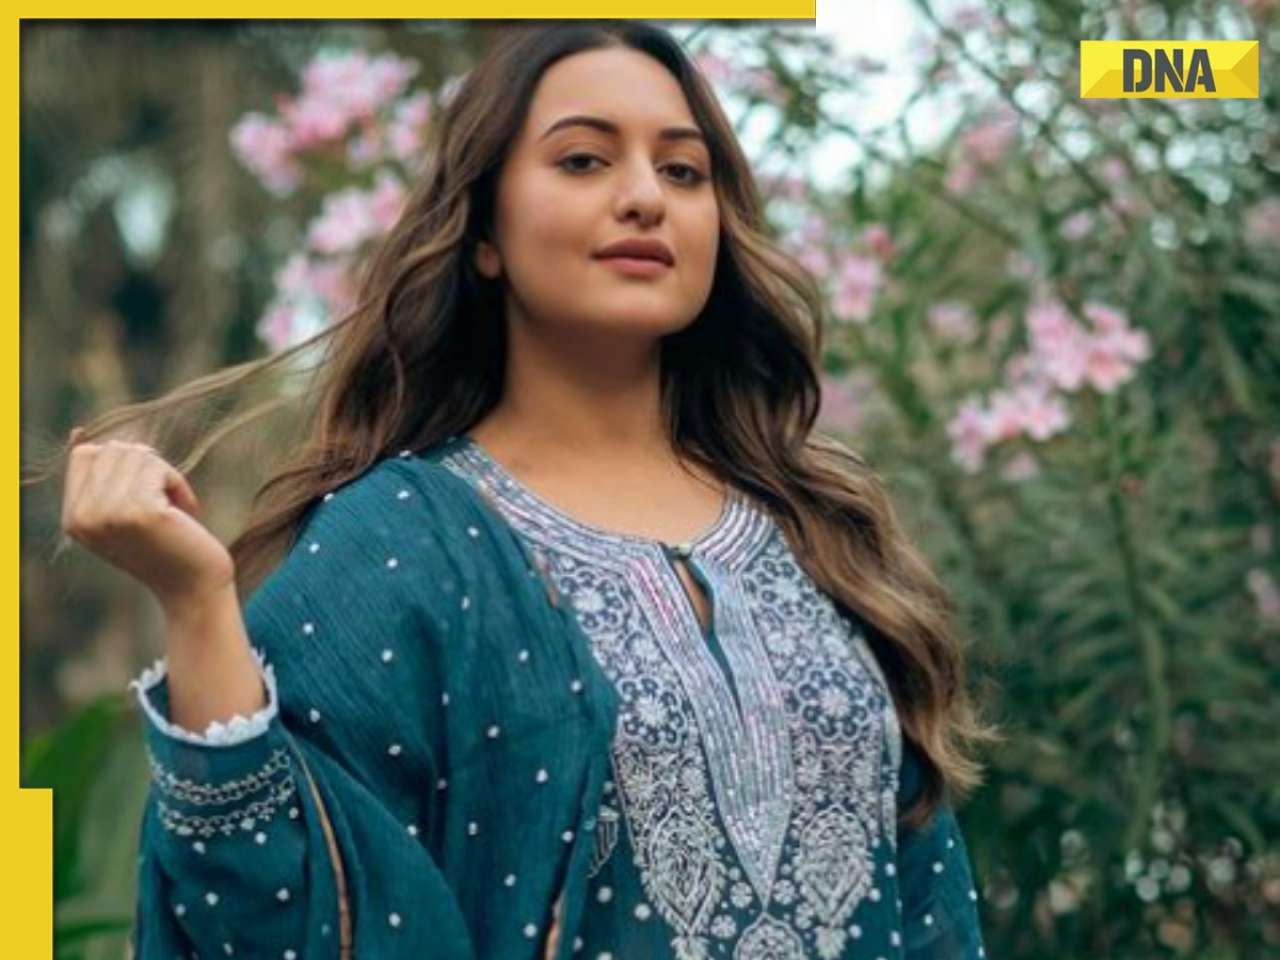 Amid reports of wedding with Zaheer Iqbal, Sonakshi Sinha says her personal life is 'nobody's business': 'I don't...'